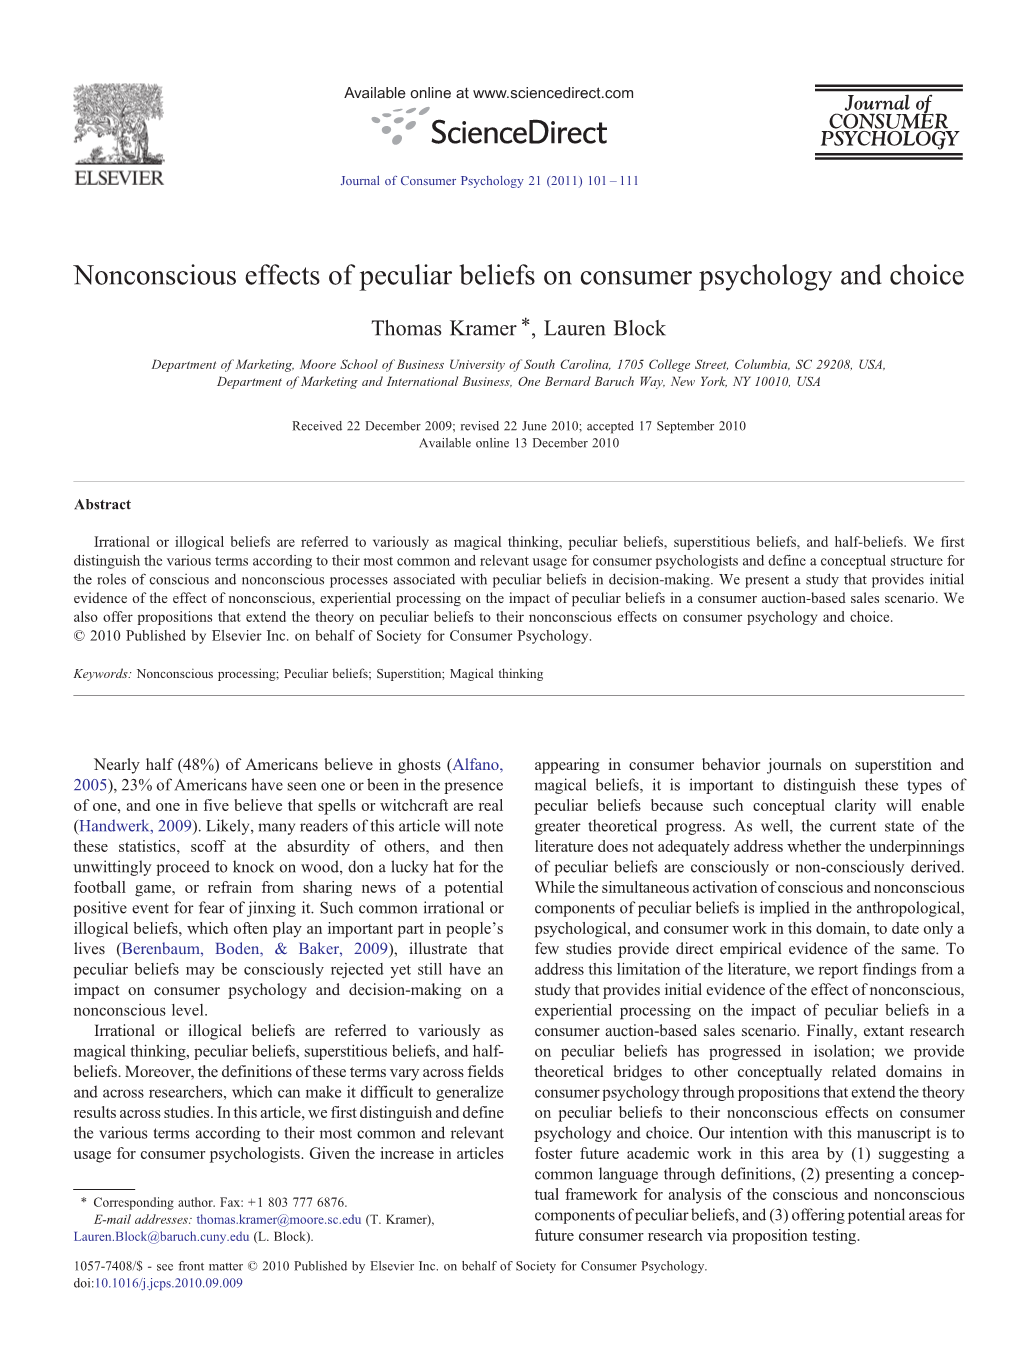 Nonconscious Effects of Peculiar Beliefs on Consumer Psychology and Choice ⁎ Thomas Kramer , Lauren Block